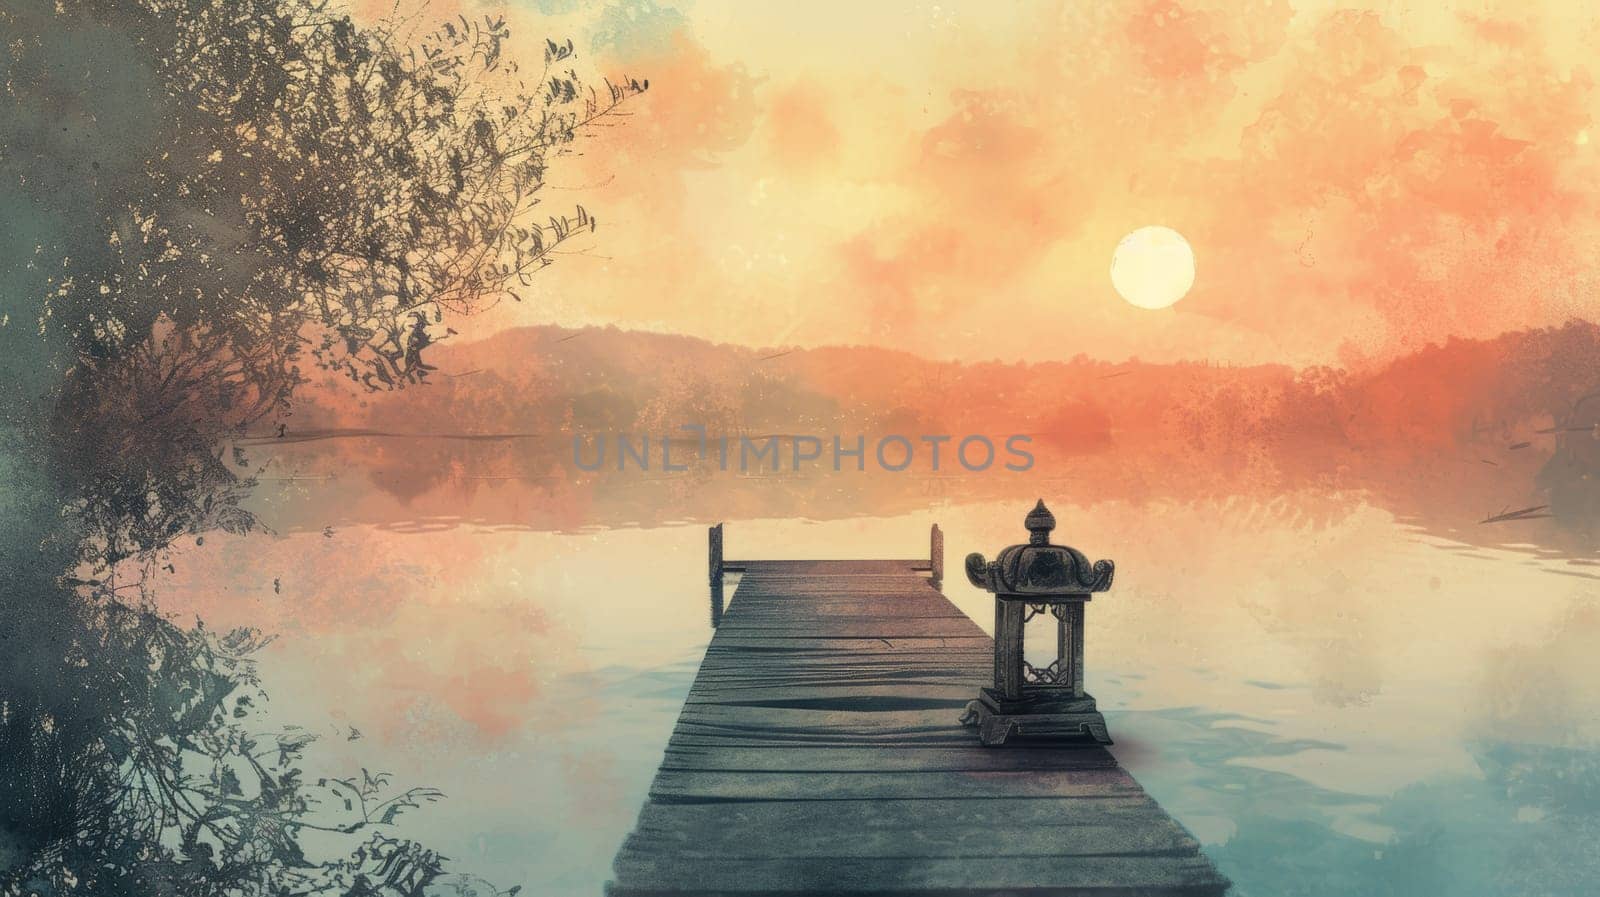 Calm sunset over a serene lake viewed from an old wooden pier with a solitary lantern. by sfinks